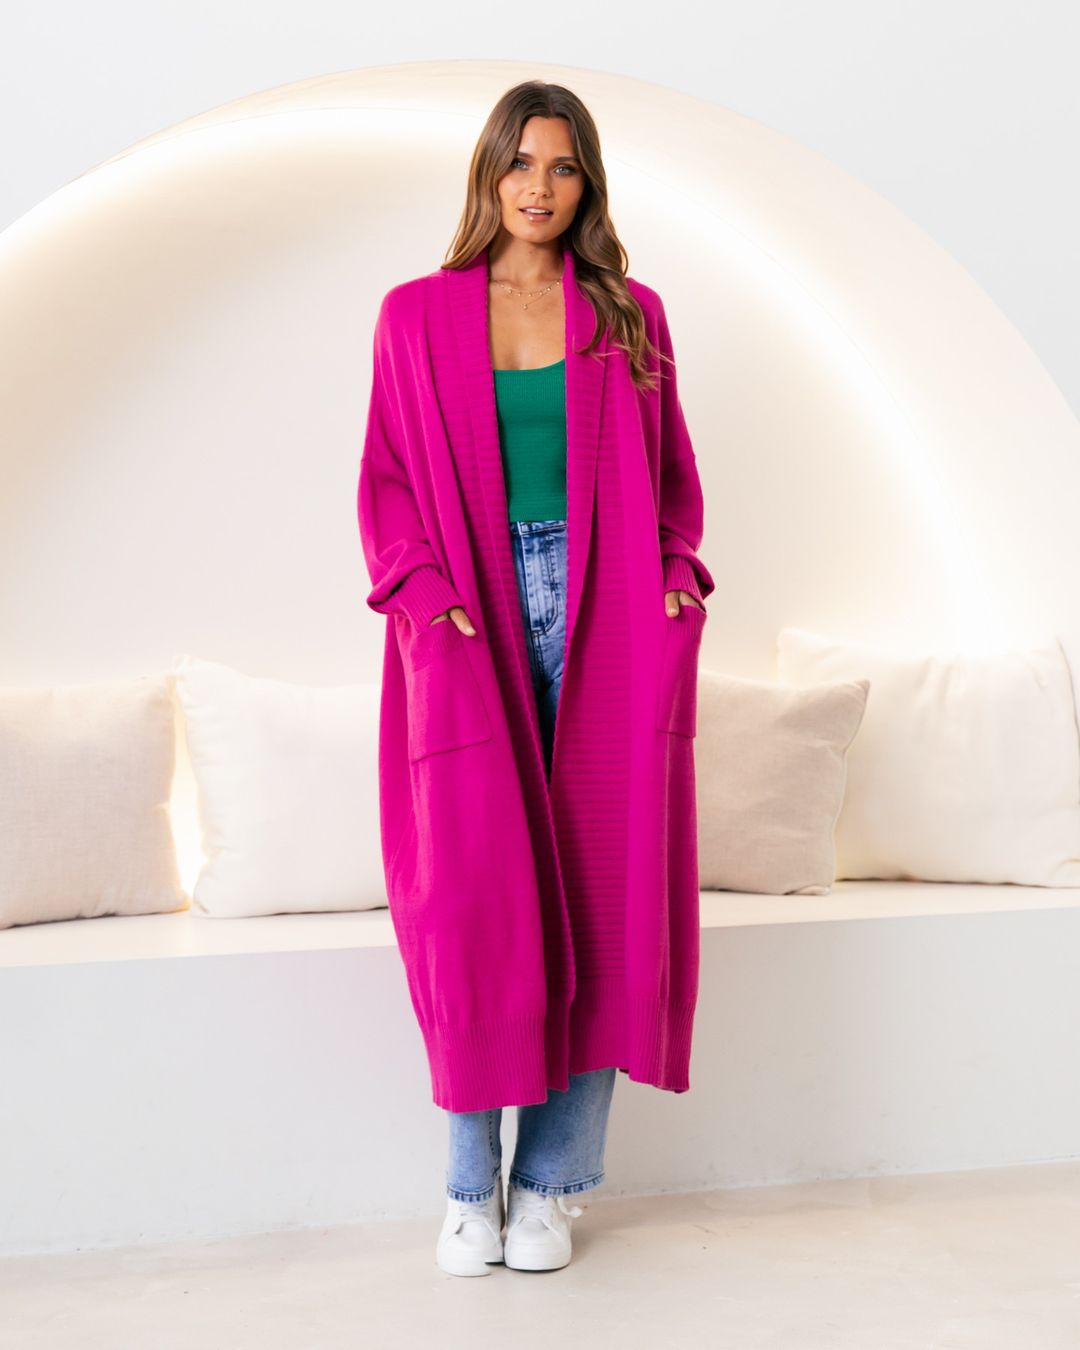 Copenhagen Maxi Cardigan: The Copenhagen Cardigan is made for those cool winter days, snuggling by the fire, or chuck it over jeans to get out and about 
Features:

Pockets
Maxi length
Long s - Ciao Bella Dresses 